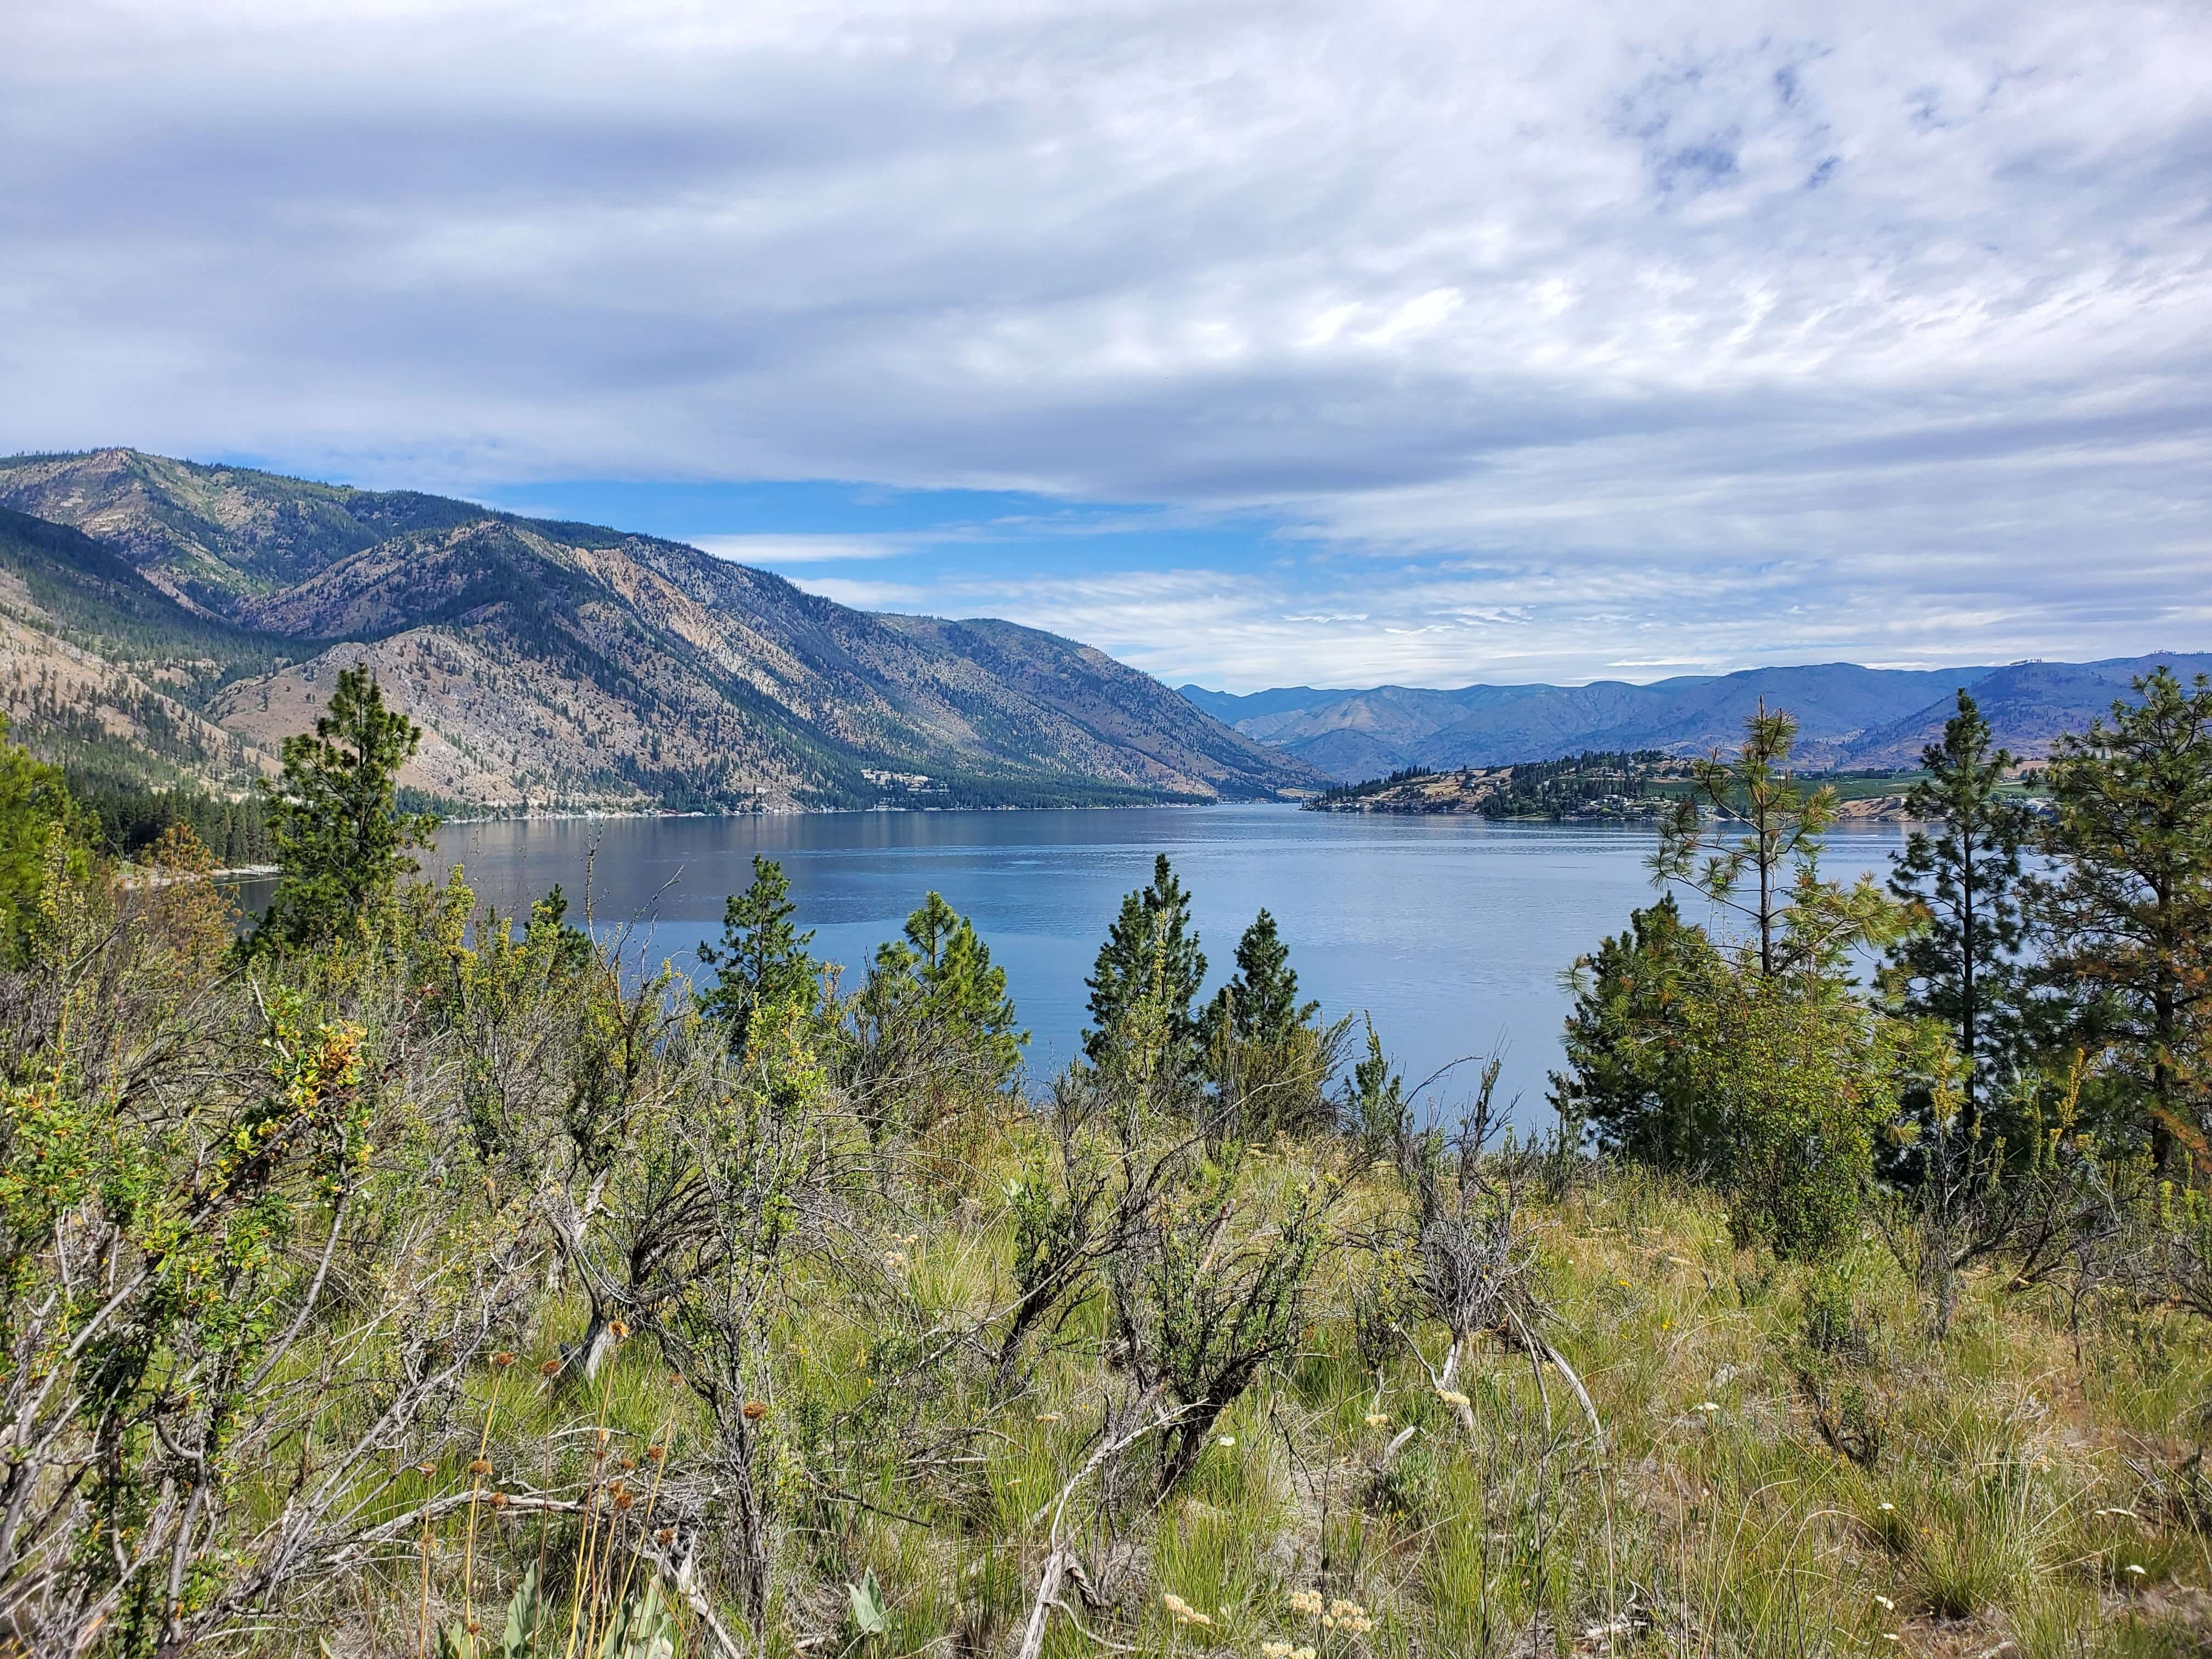 View of Lake Chelan from Little Bear trail in Lake Chelan State Park